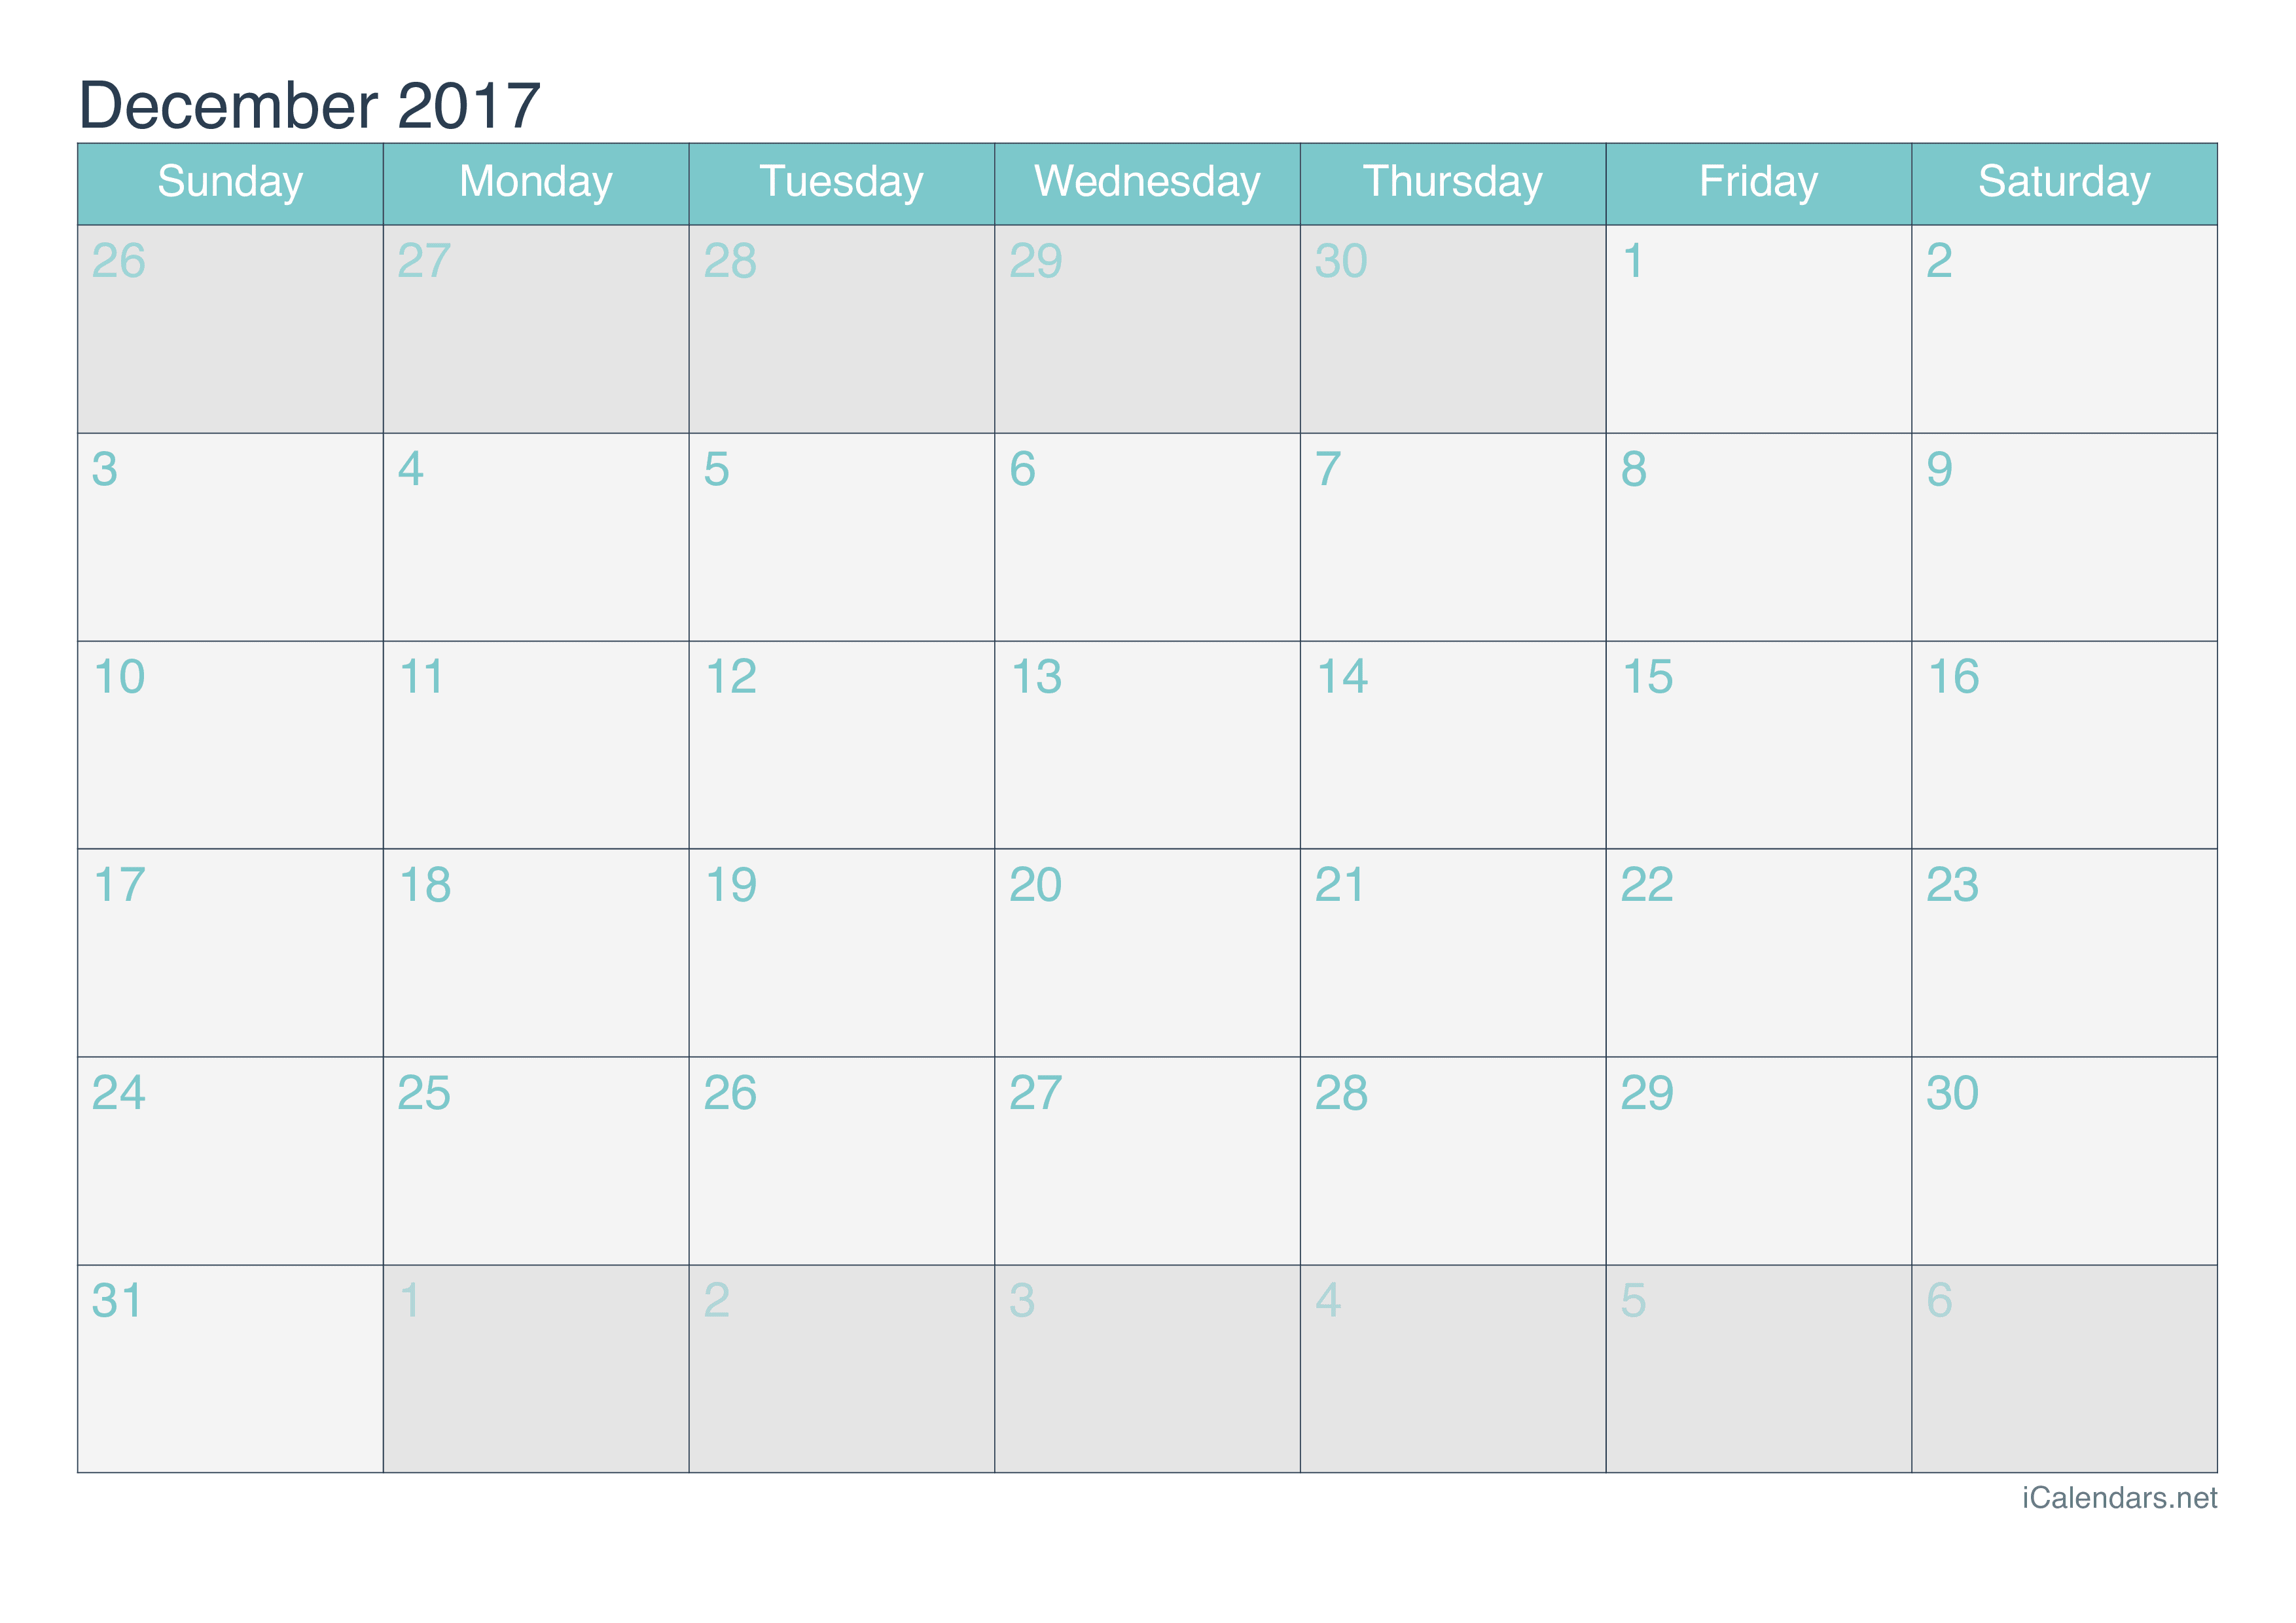 december-2017-calendar-templates-for-word-excel-and-pdf